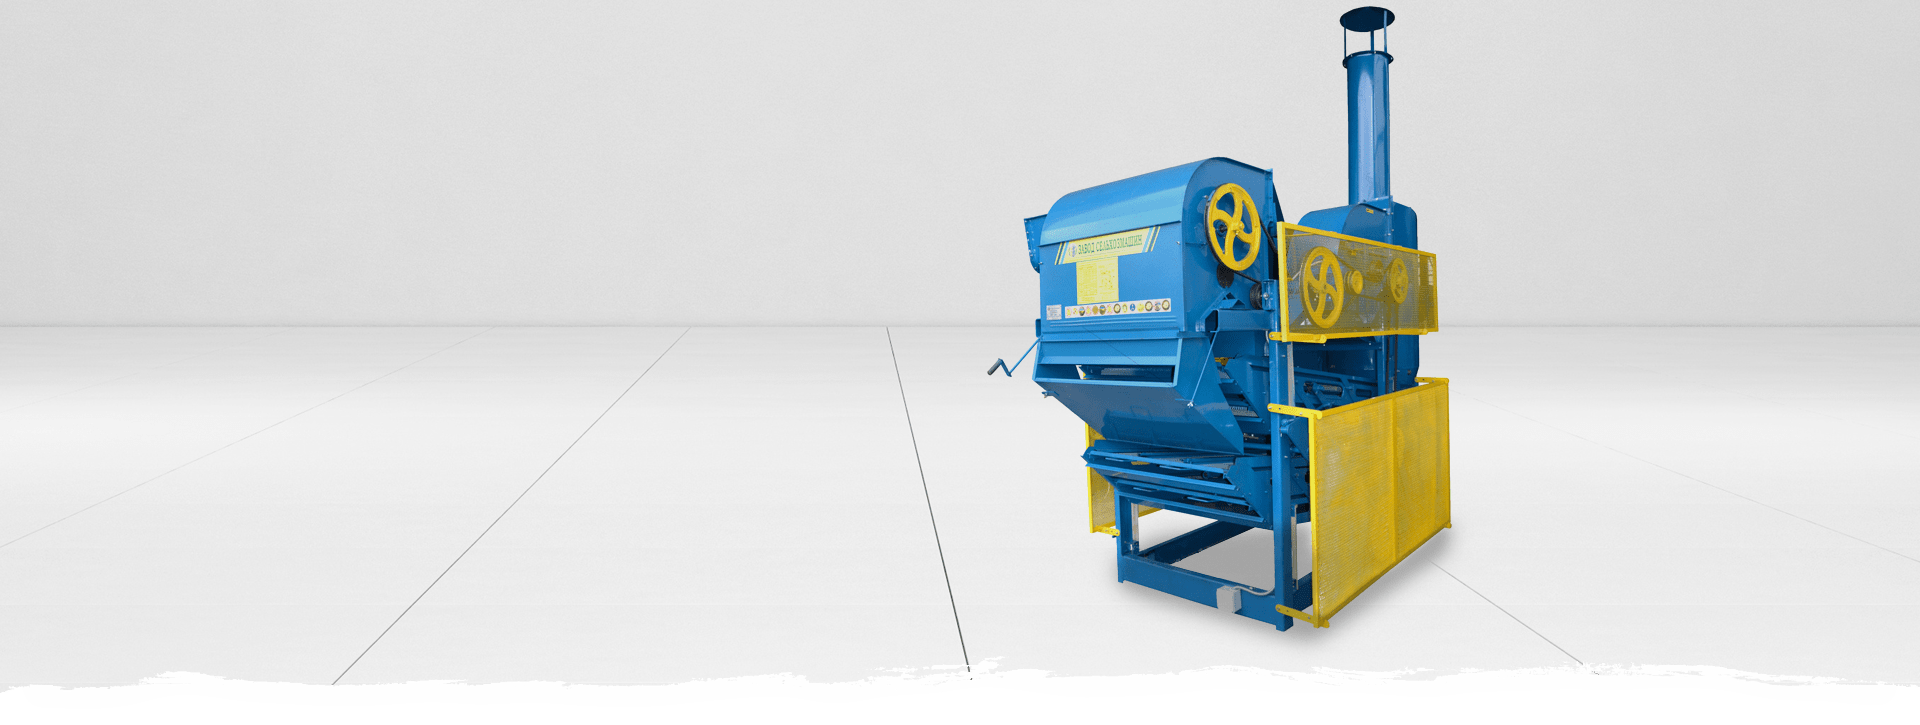 OBC-25CC stationary grain cleaner with a cyclone, photo